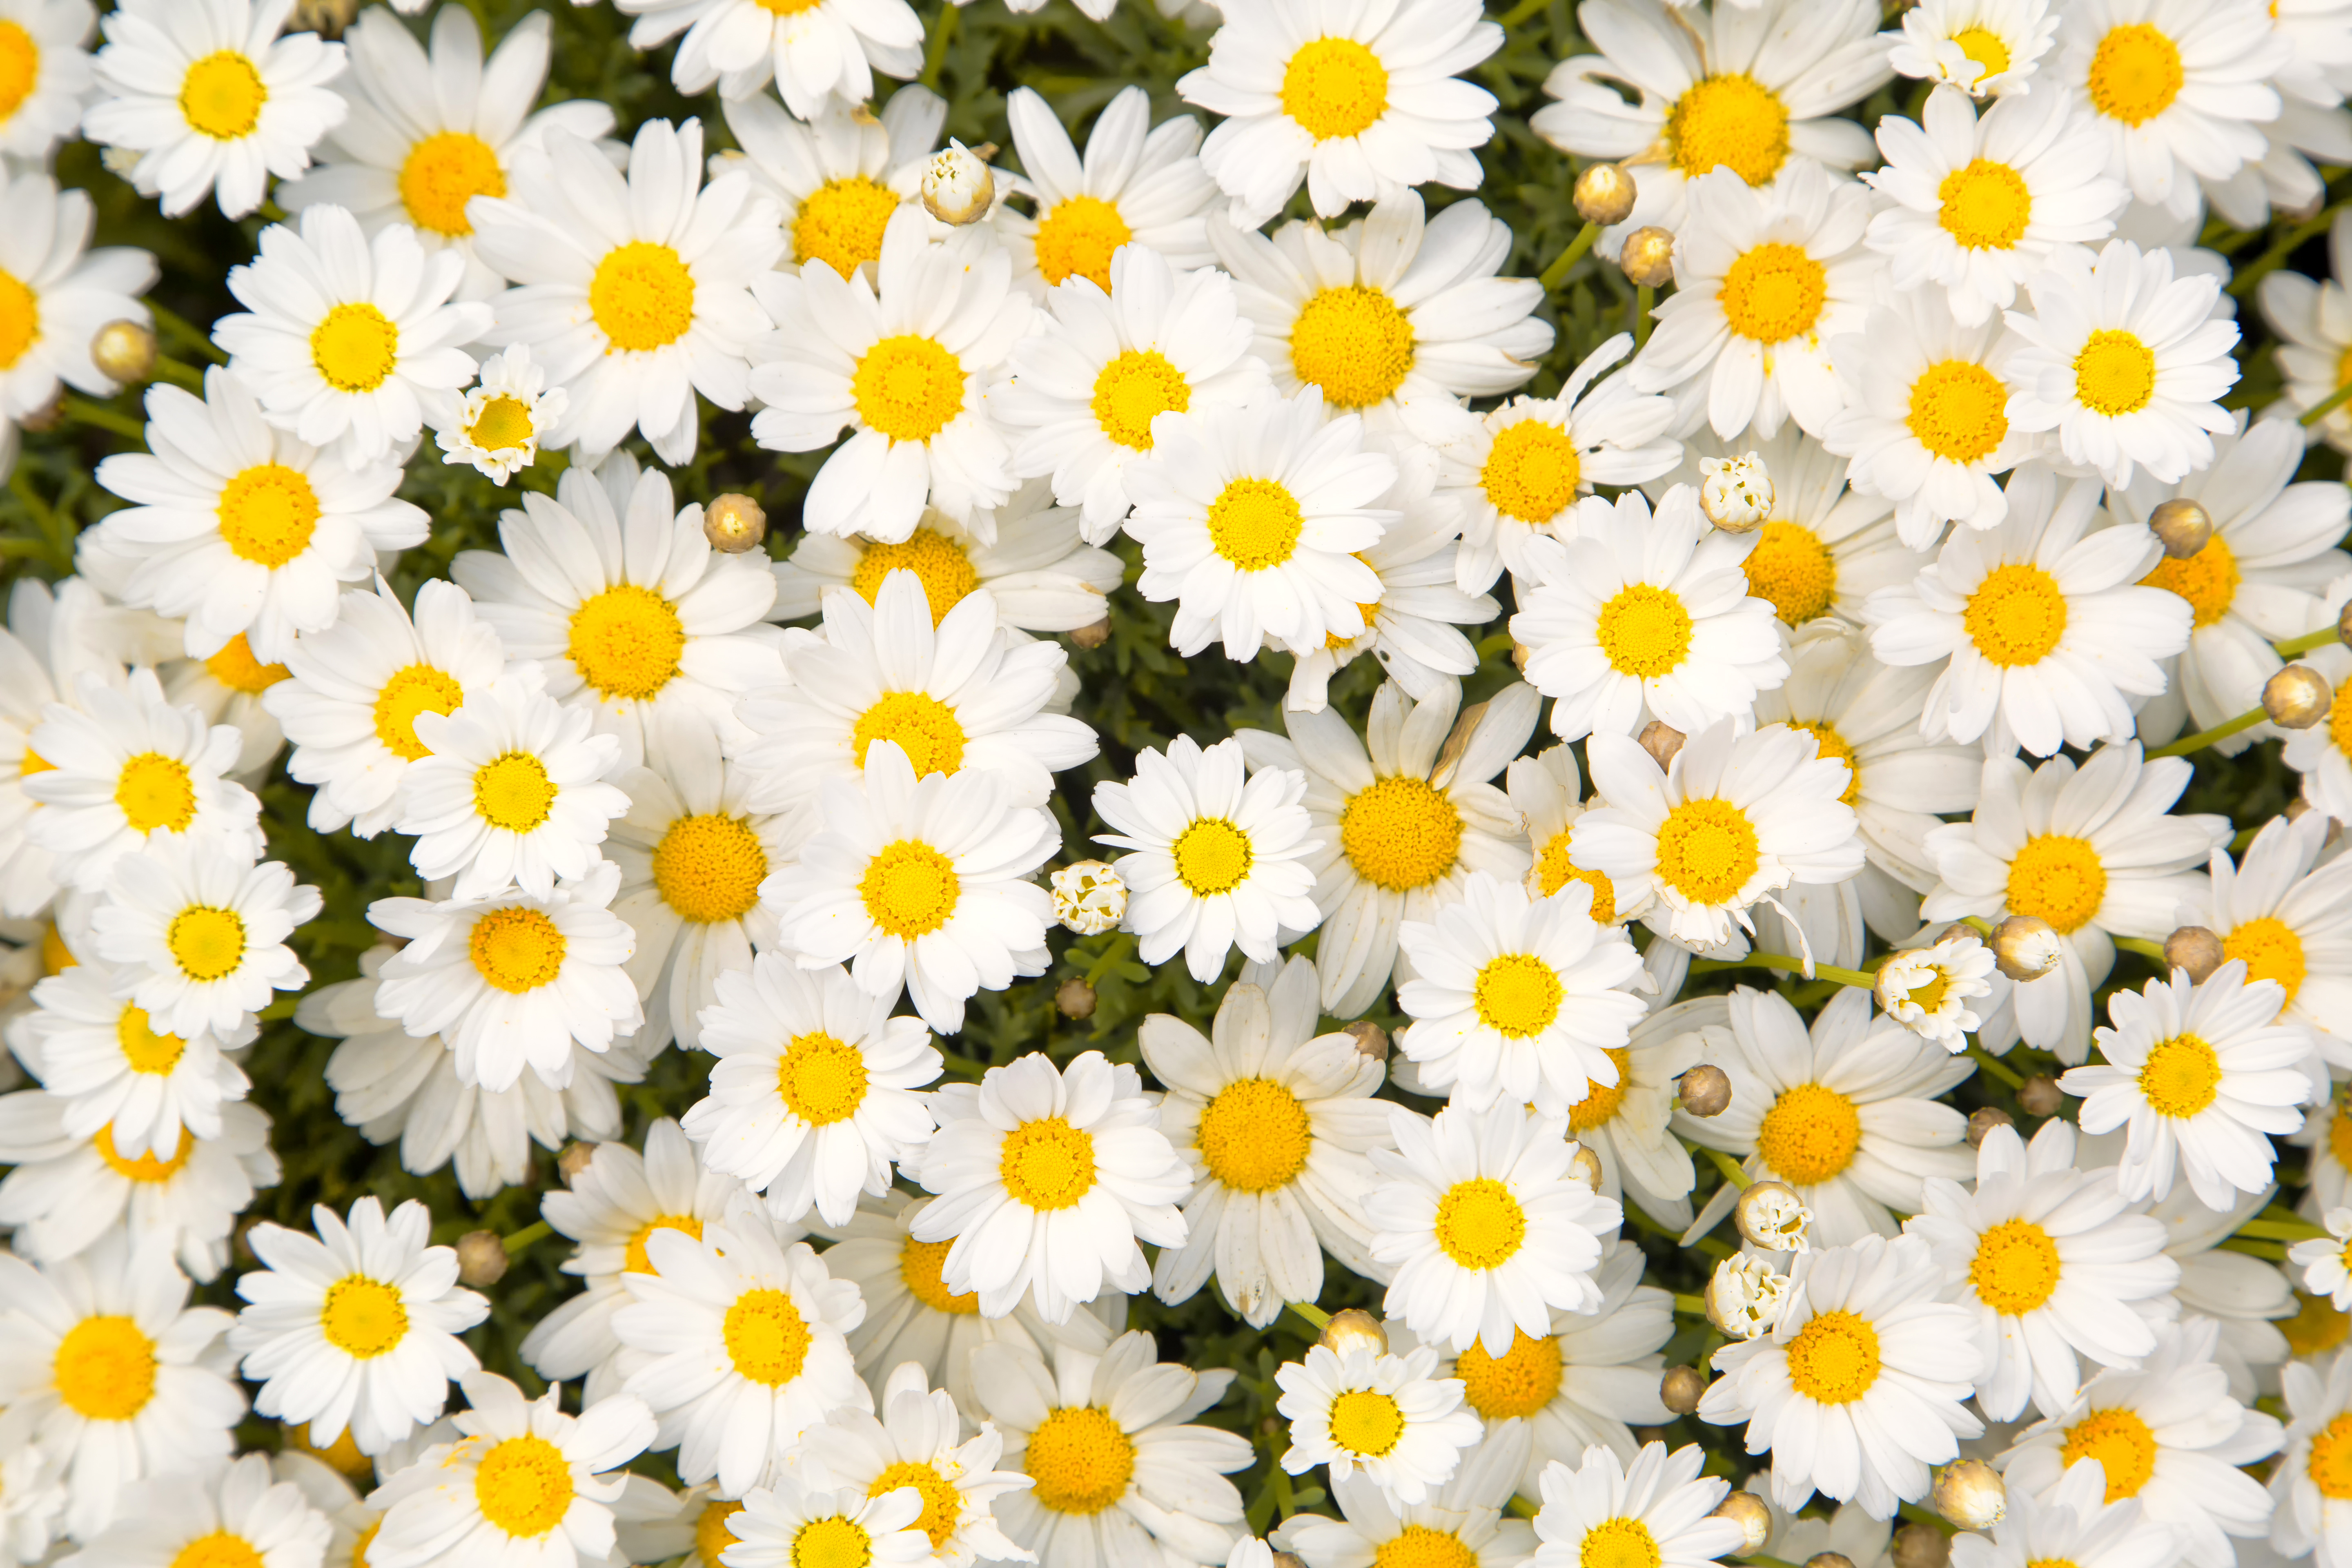 Earth Camomile Daisy Close Up White Flower 5760x3840